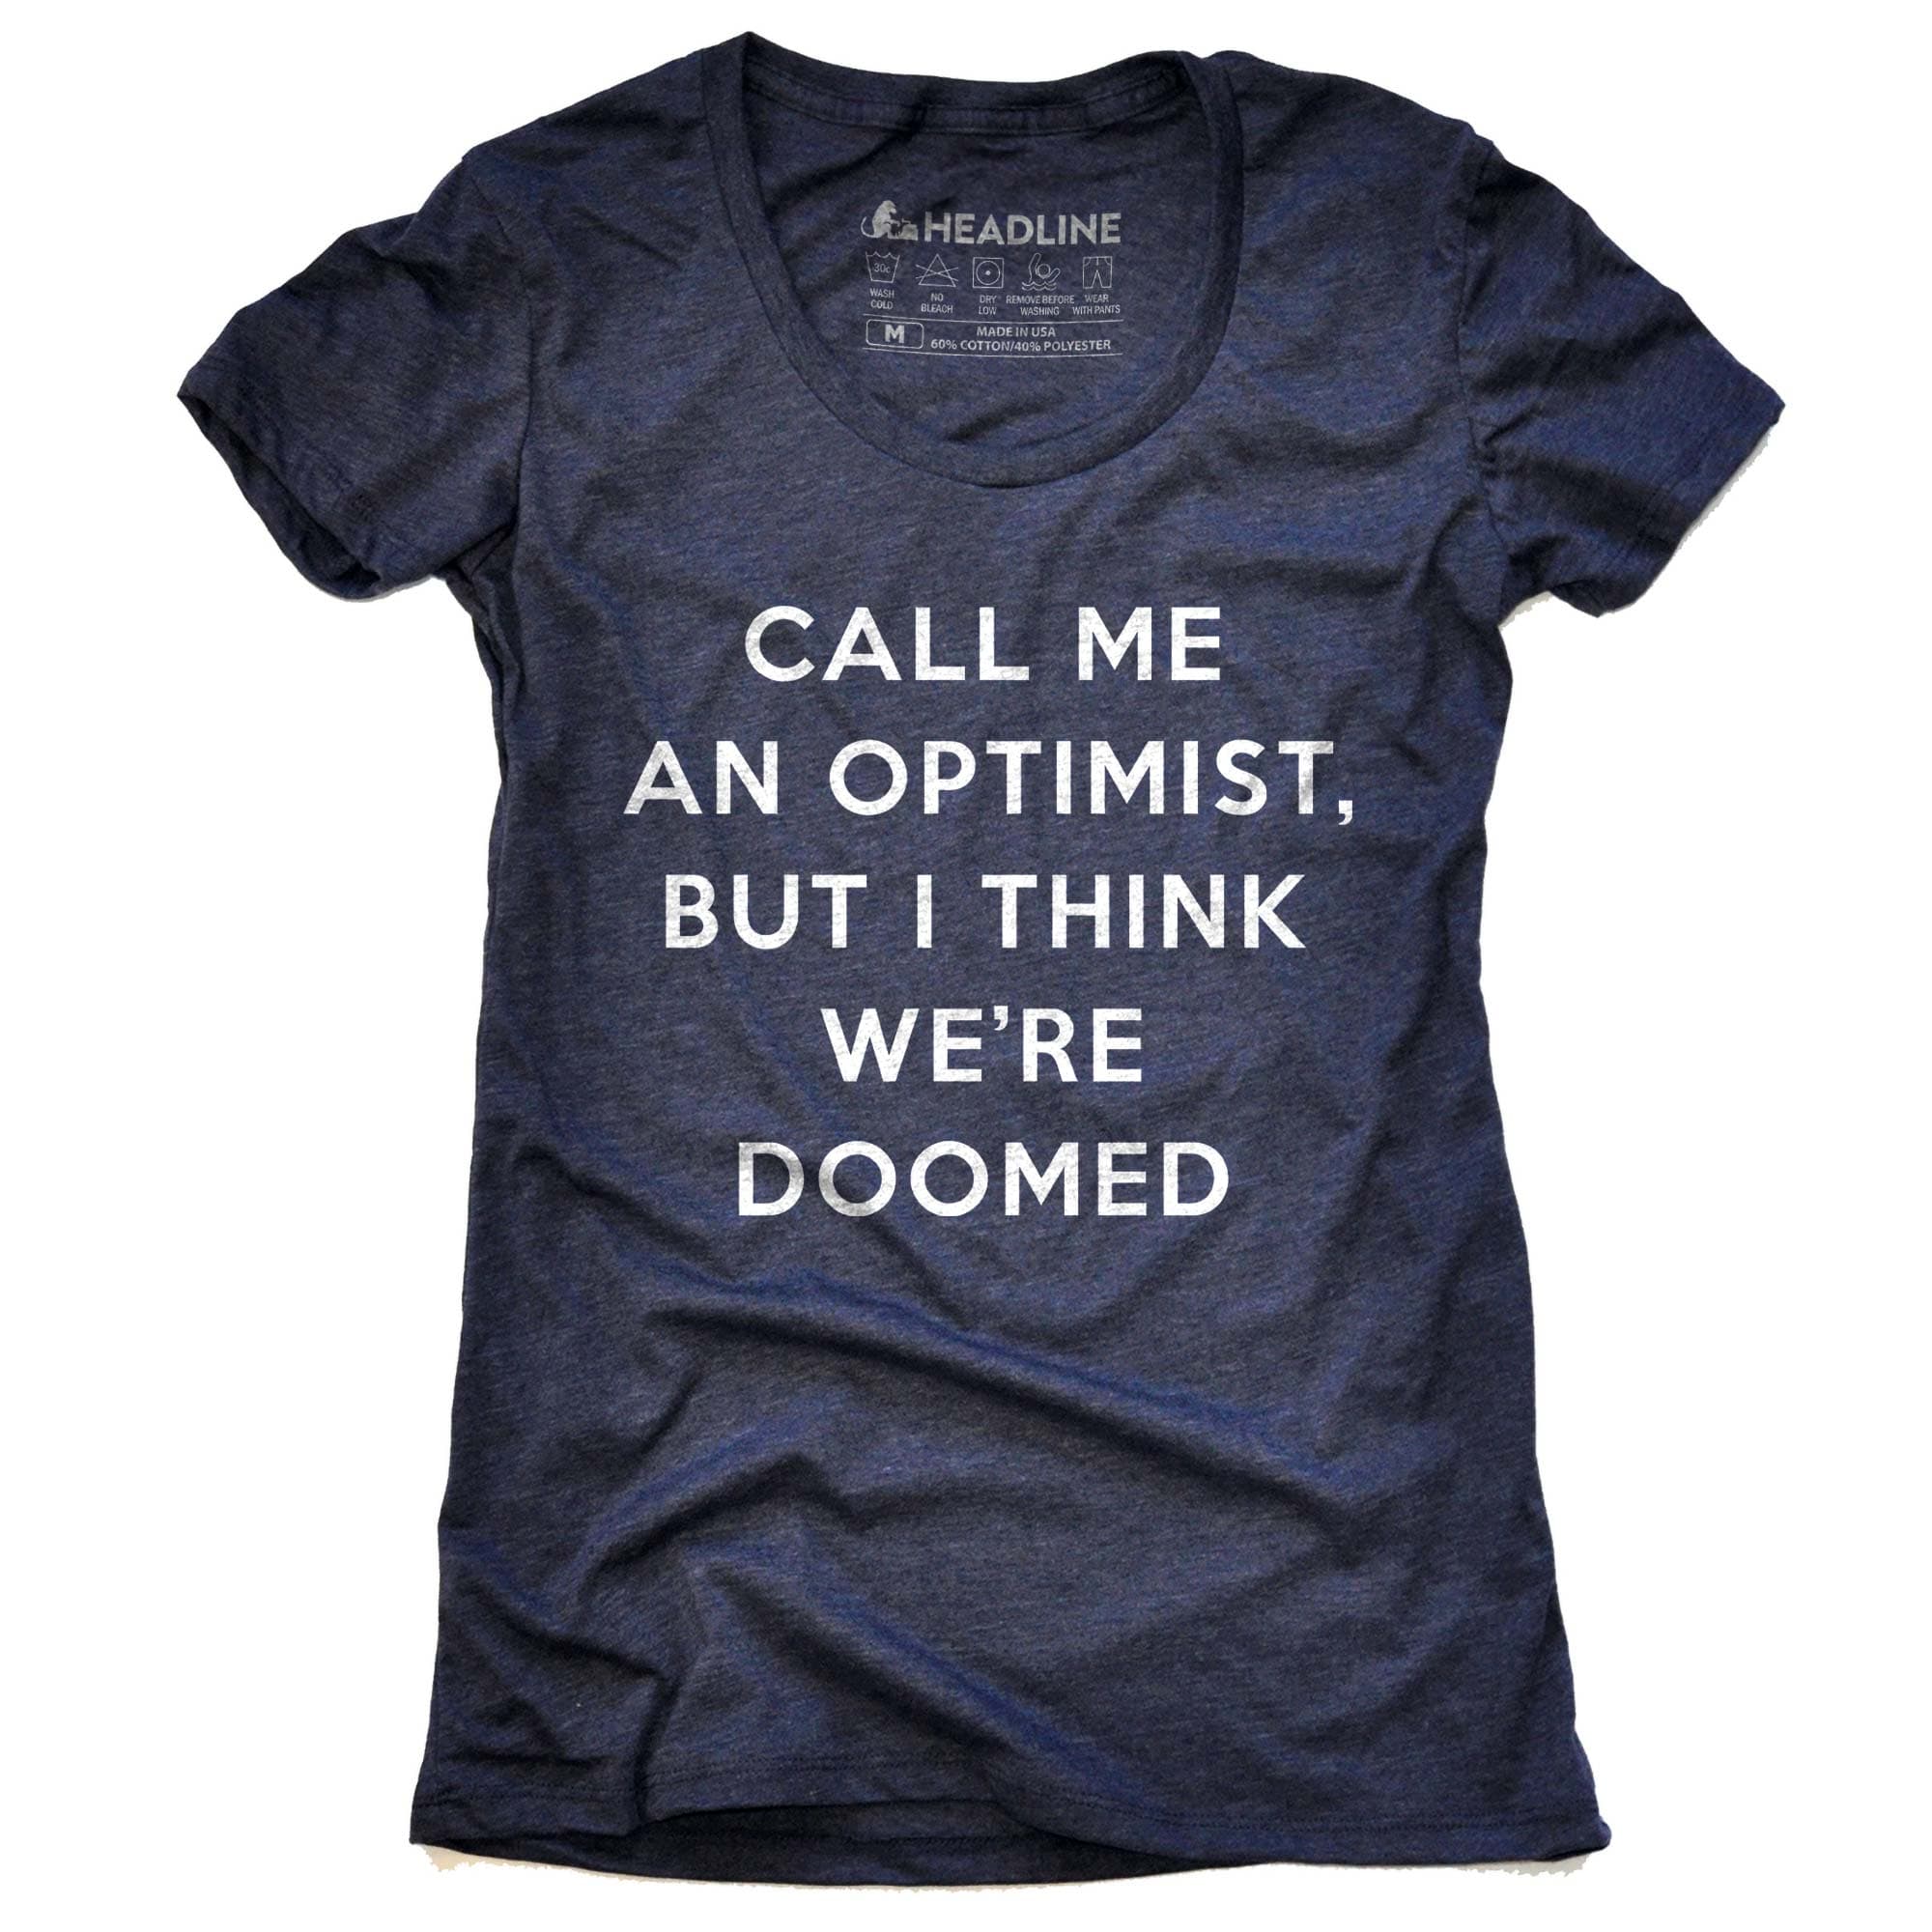 Women's Optimist But I Think We're Doomed Designer Graphic T-Shirt | Funny Ironic Tee | Solid Threads